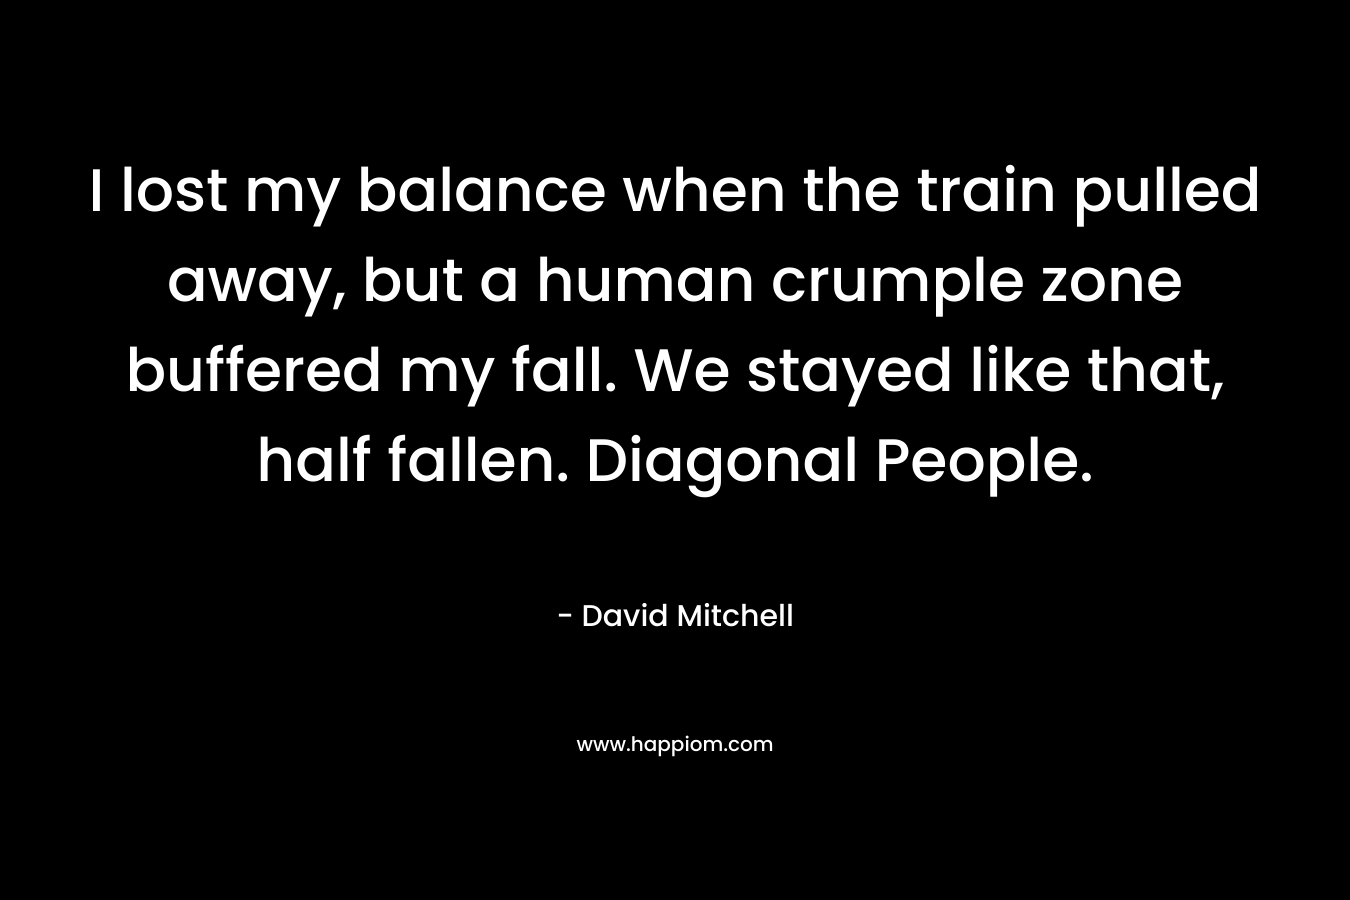 I lost my balance when the train pulled away, but a human crumple zone buffered my fall. We stayed like that, half fallen. Diagonal People.